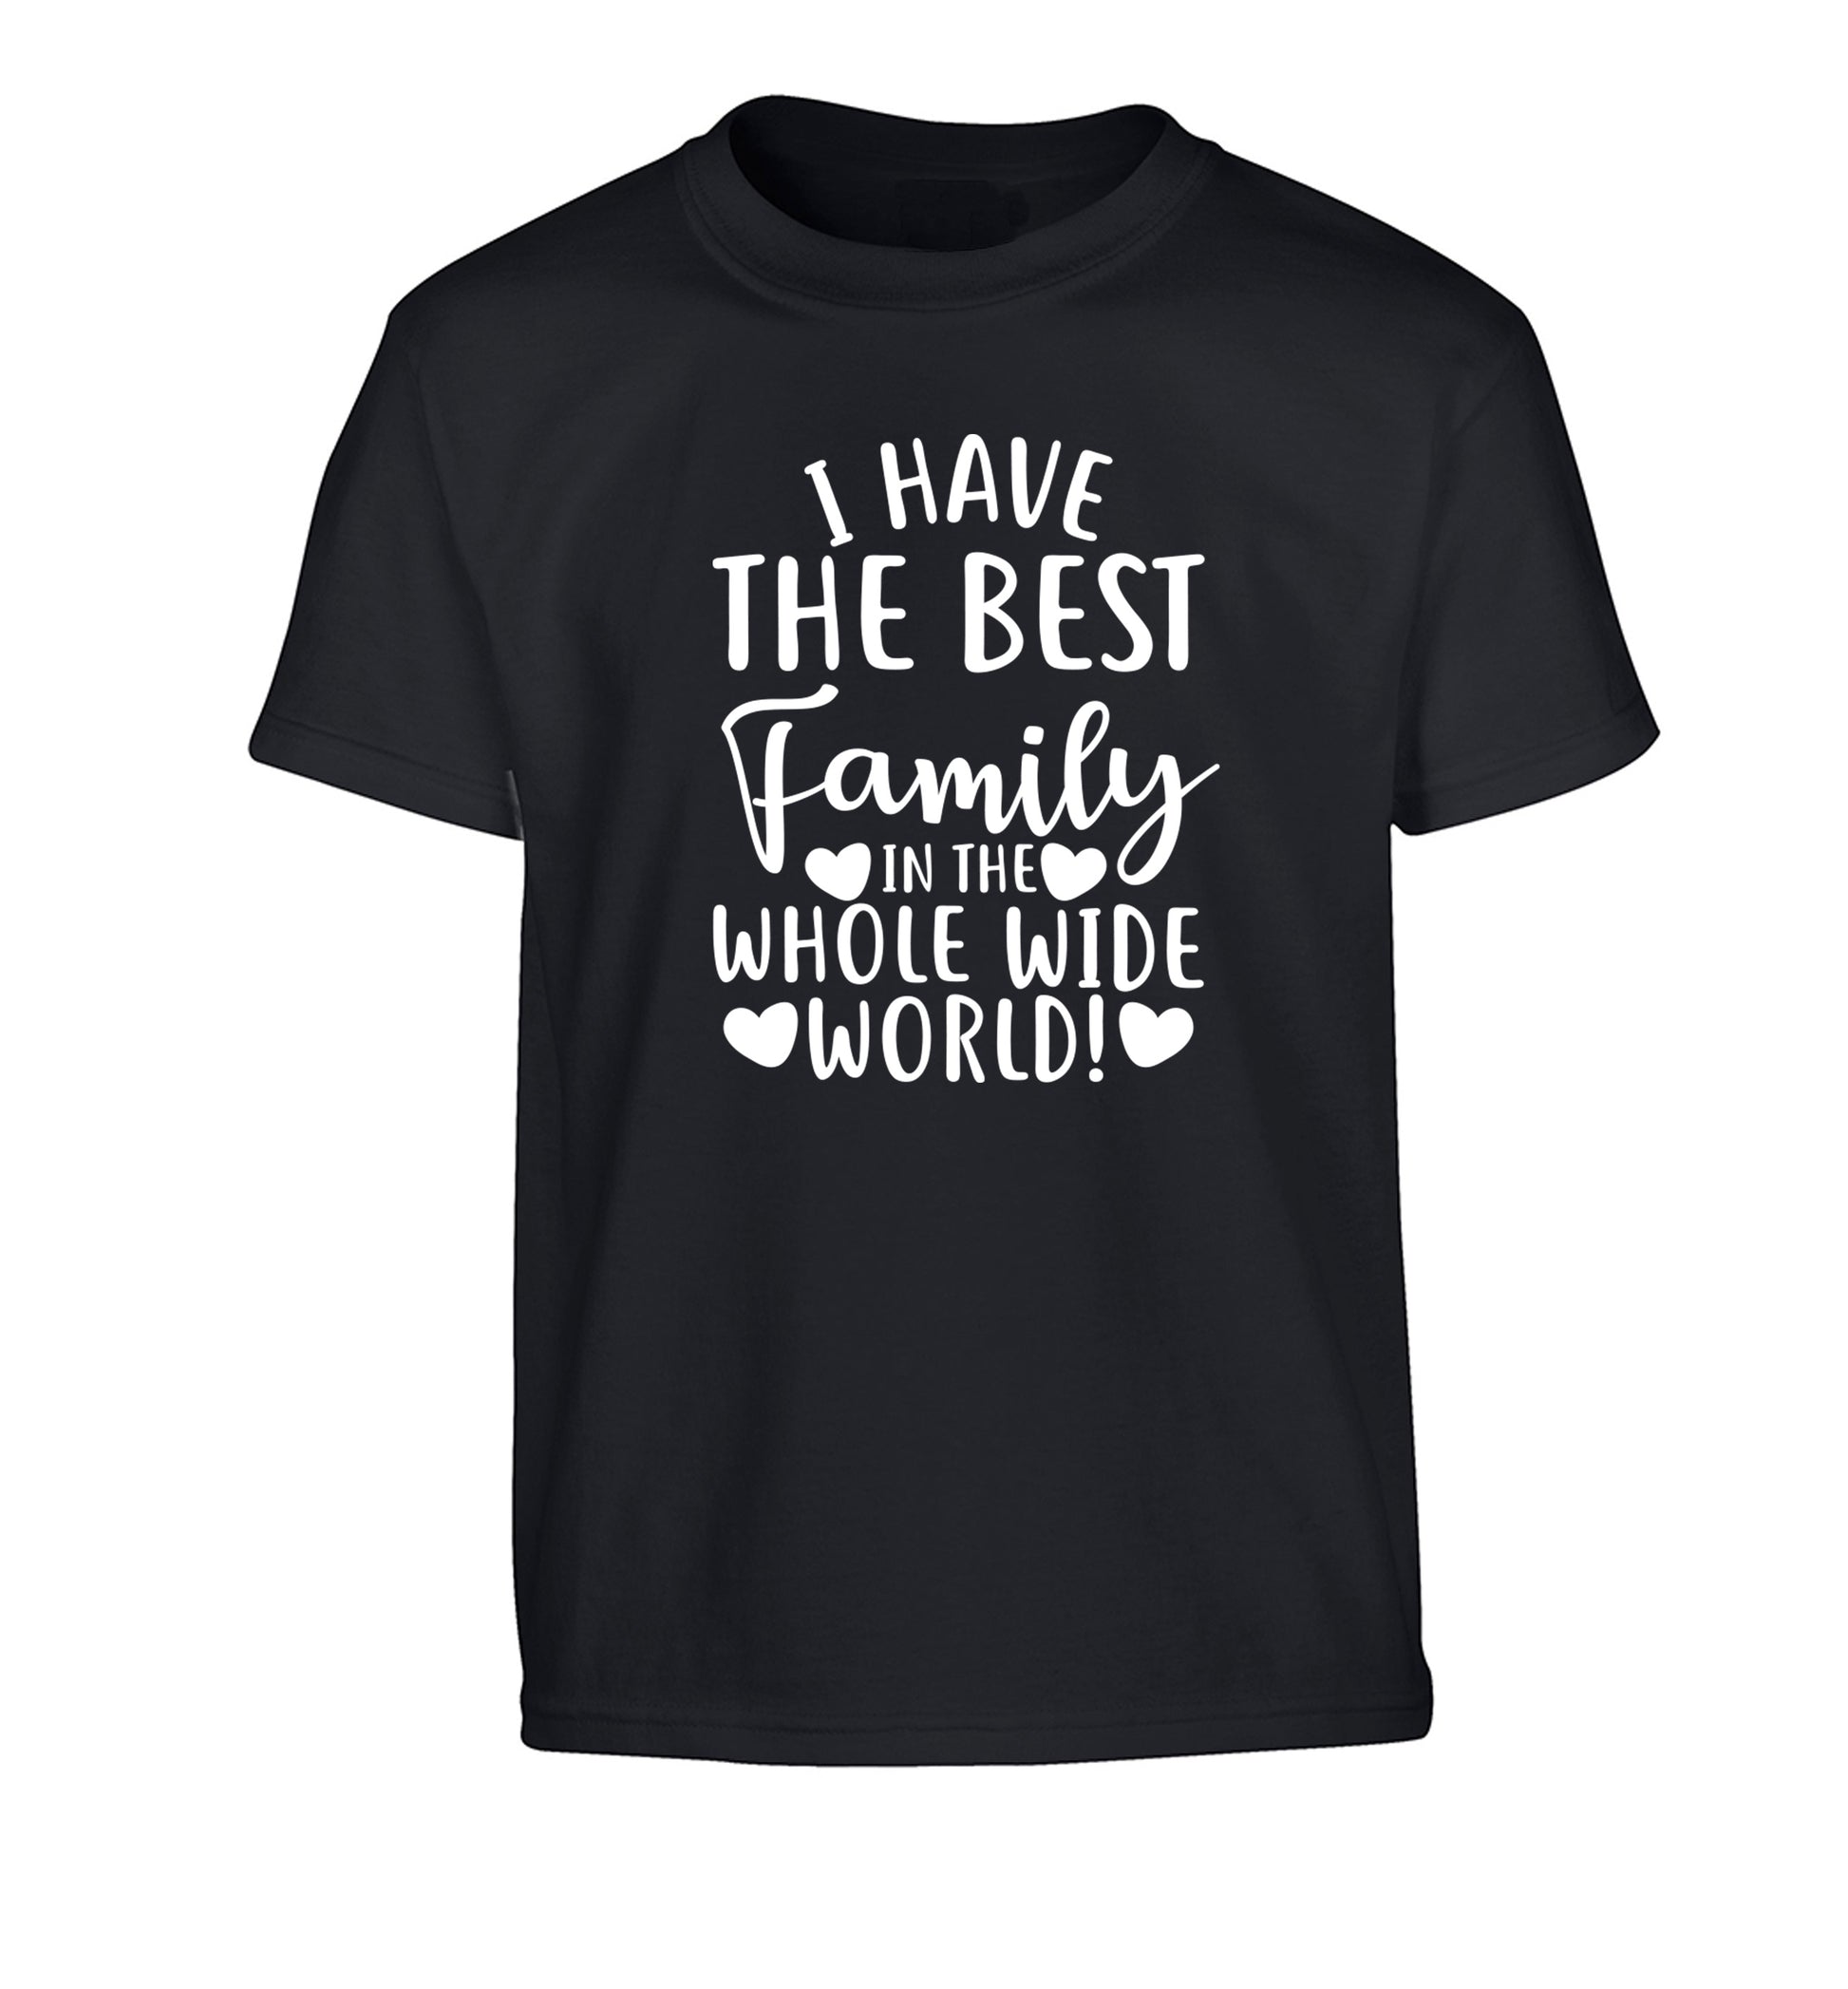 I have the best family in the whole wide world! Children's black Tshirt 12-13 Years